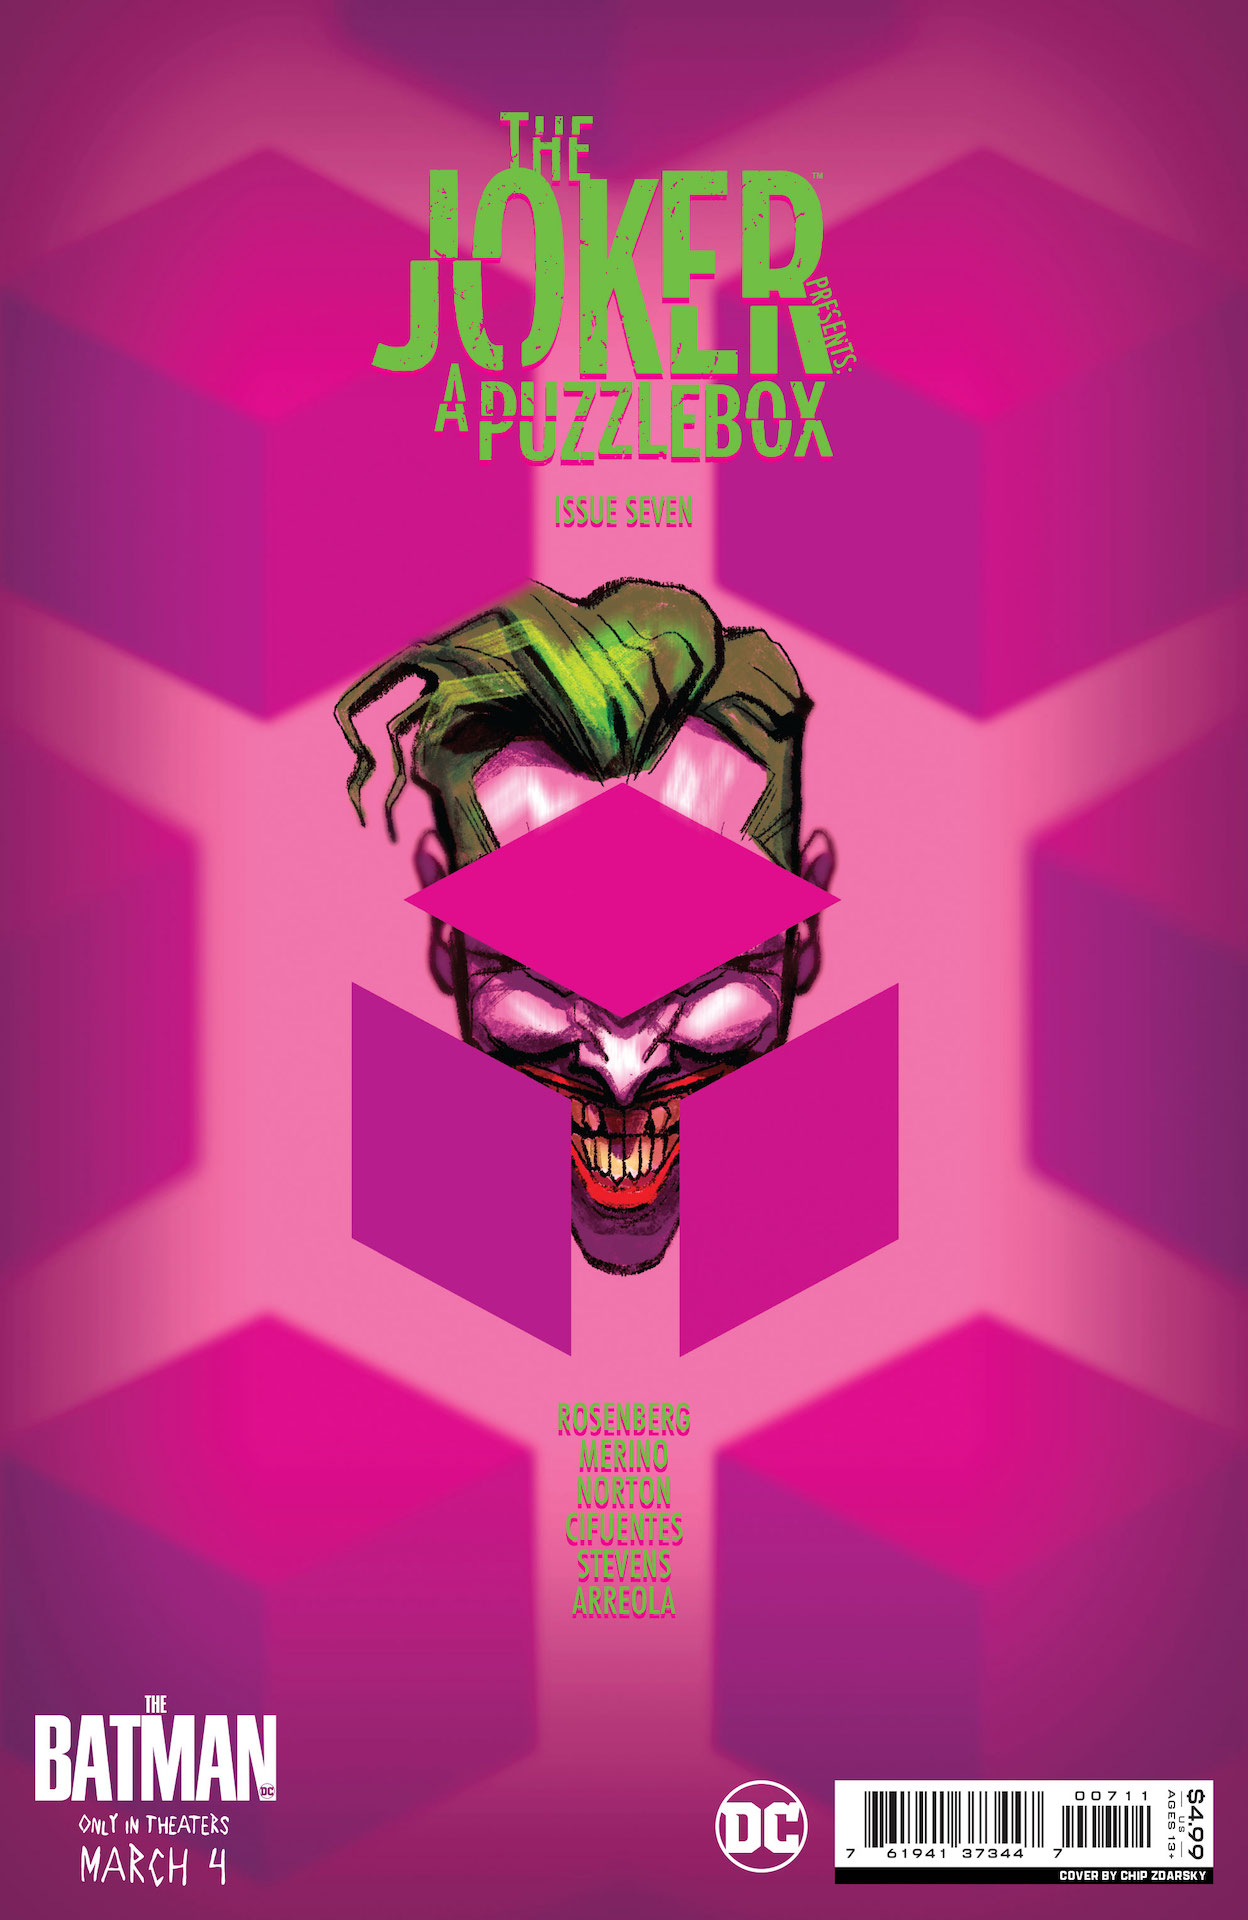 DC Preview: The Joker Presents: A Puzzlebox #7